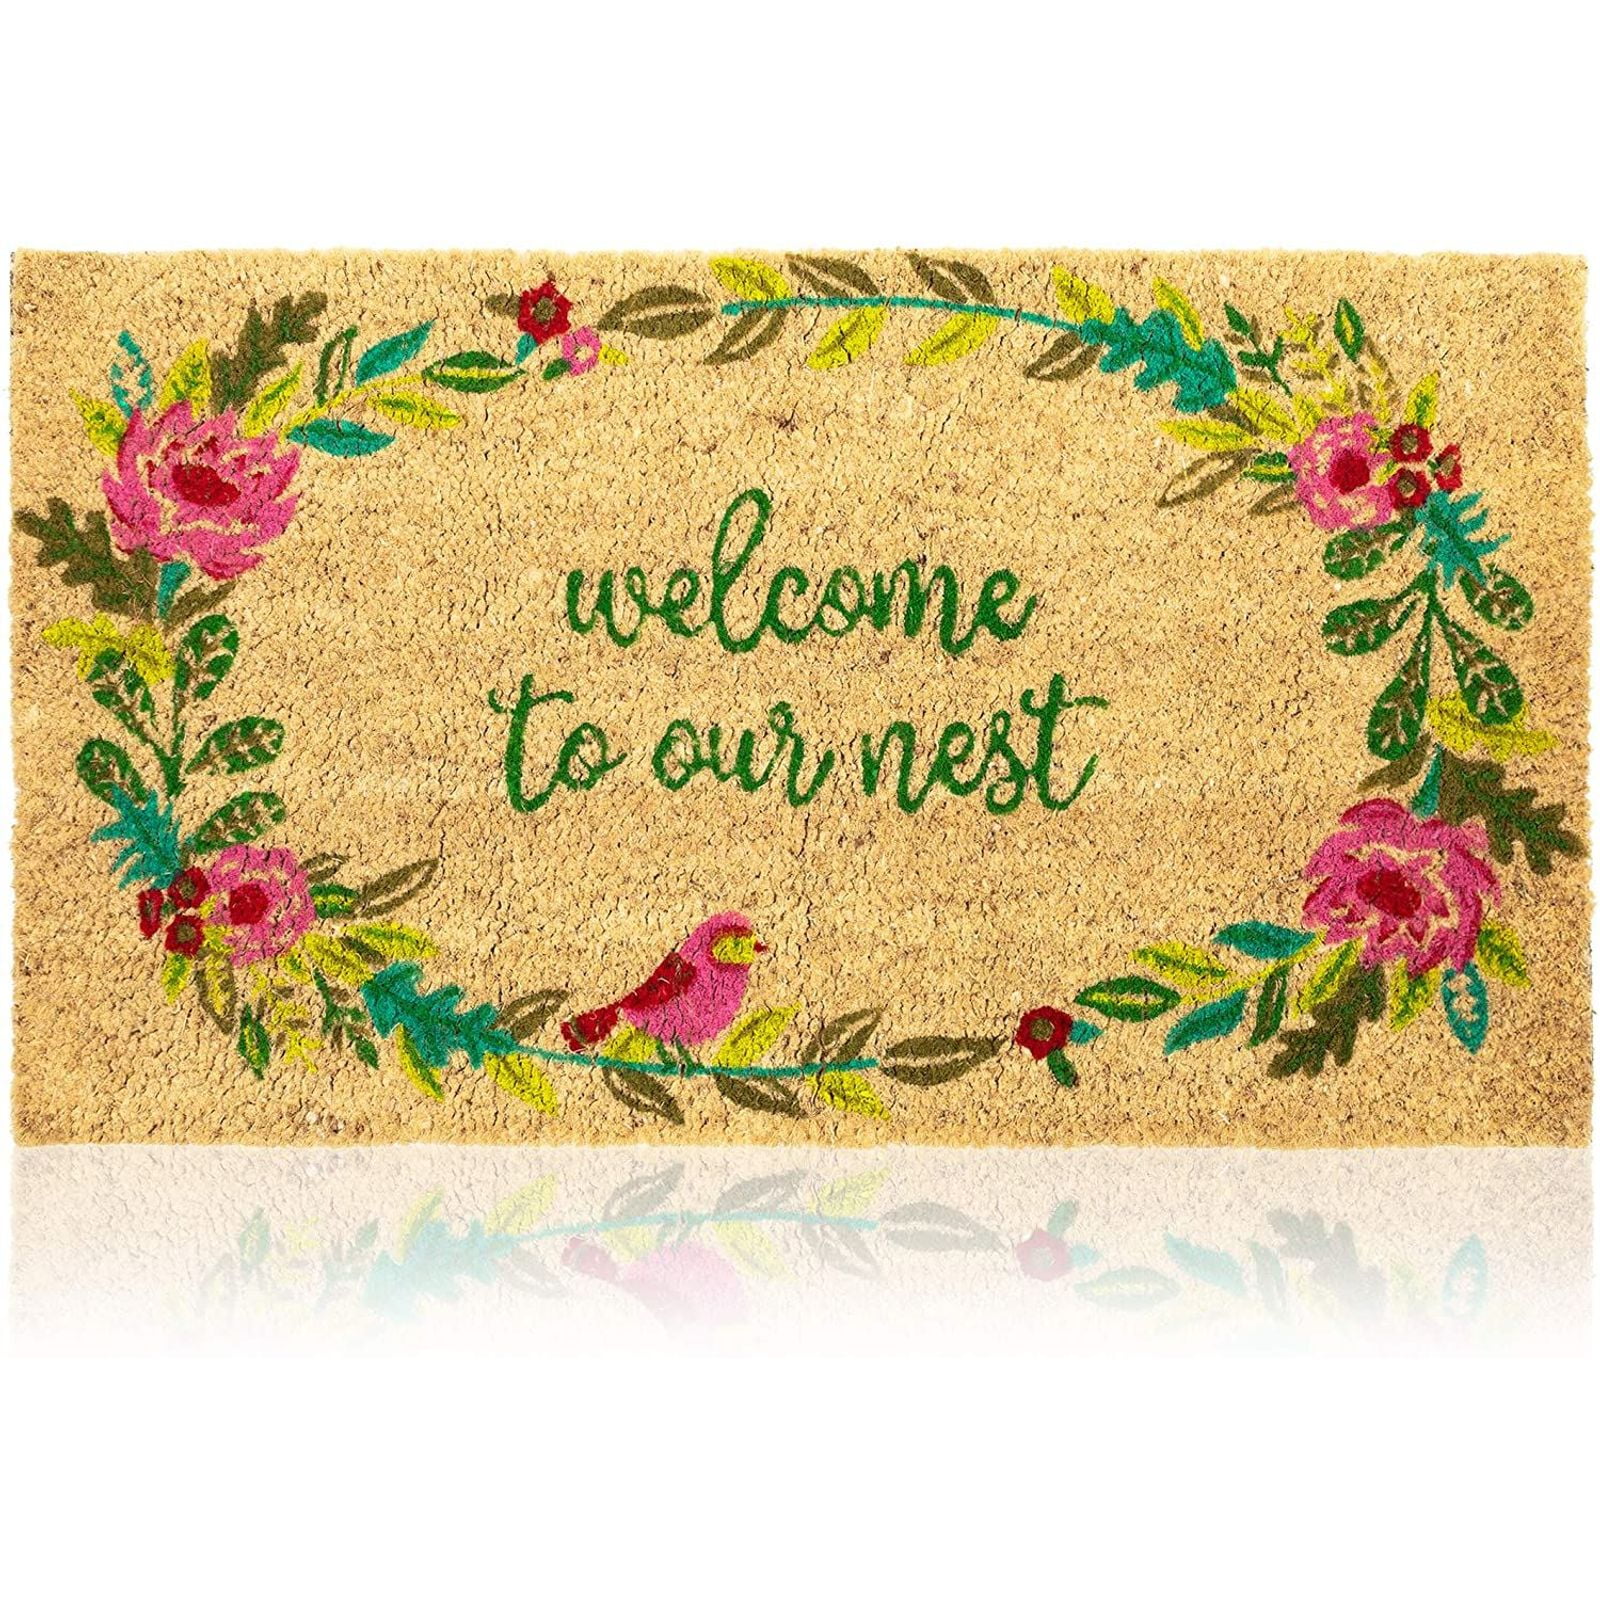 Bright Floral Natural Coco Coir Mat Nonslip Welcome Doormat 17 x 30 in